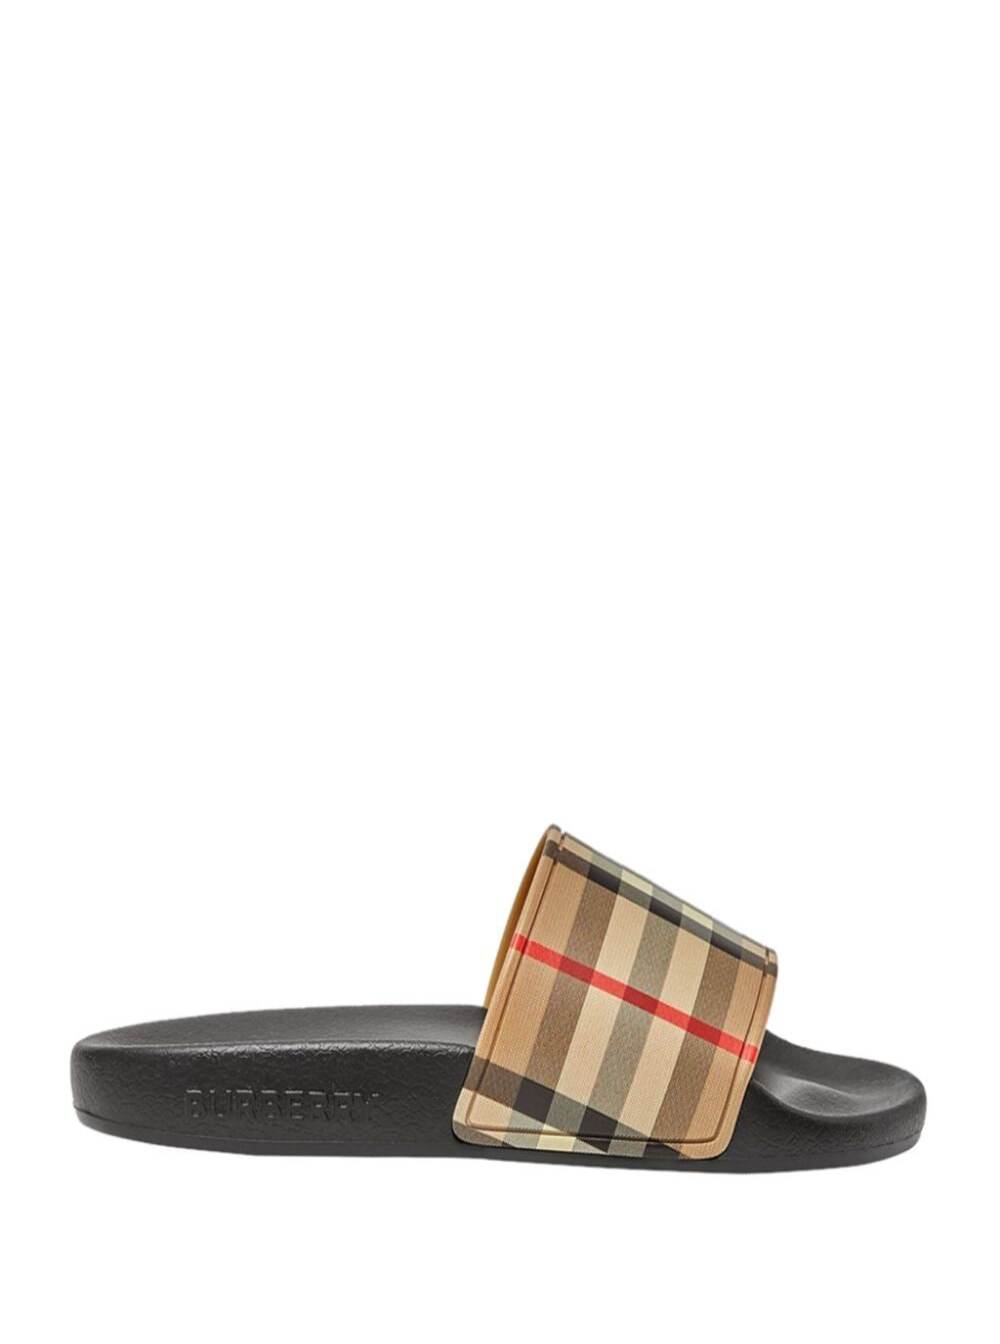 Burberry Boy Rubber Beige Slipper With Vintage Check Print